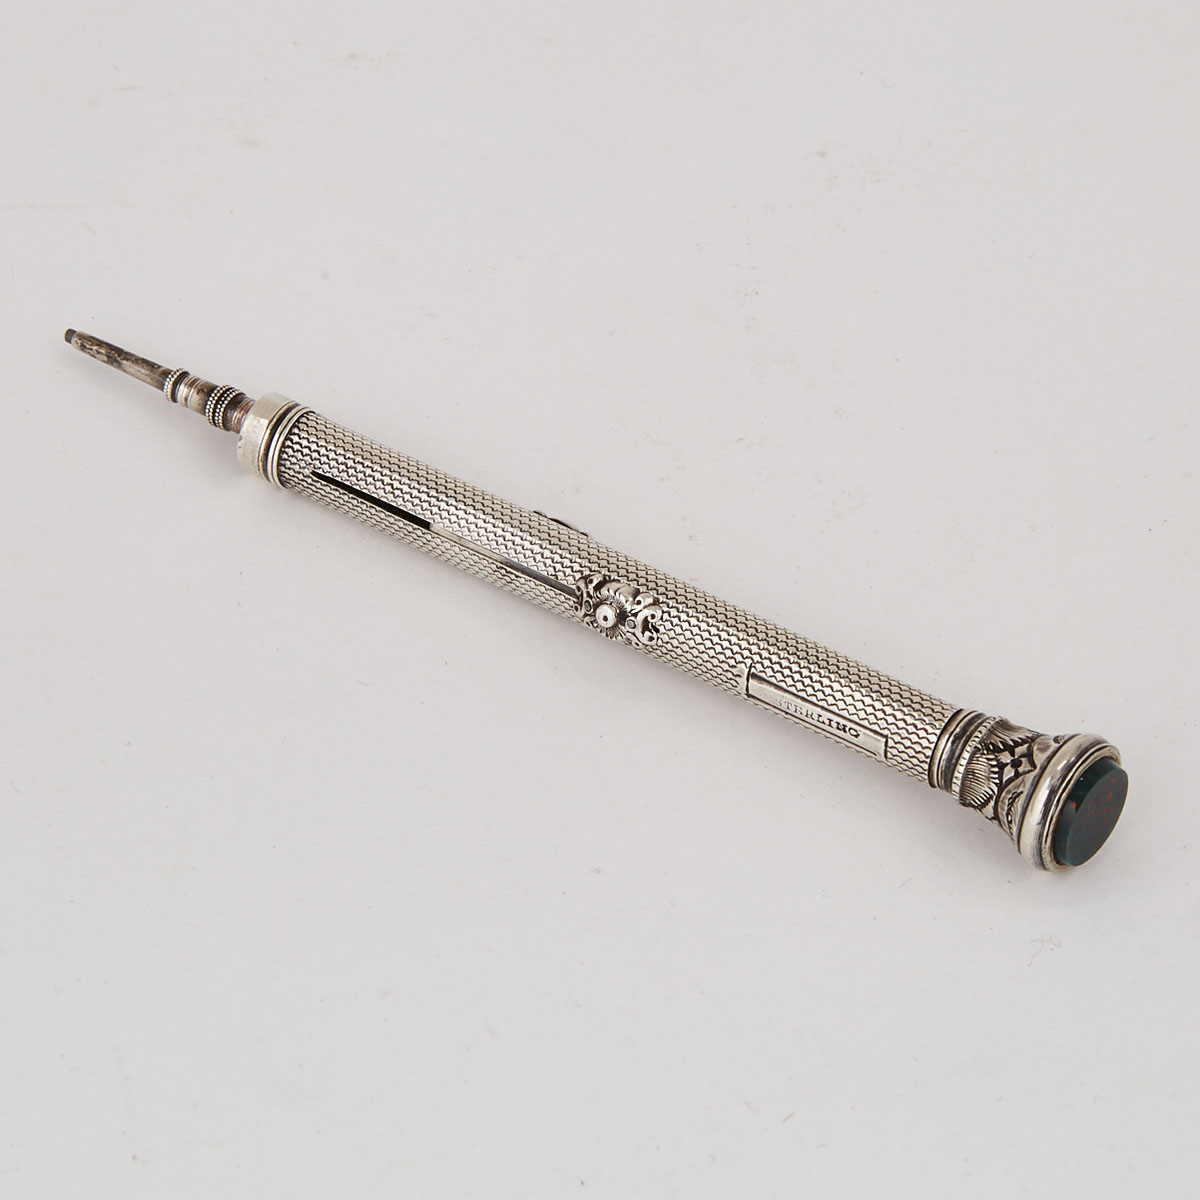 Edwardian Silver Mechanical Combination Pen and Pencil with Bloodstone Seal, c.1910